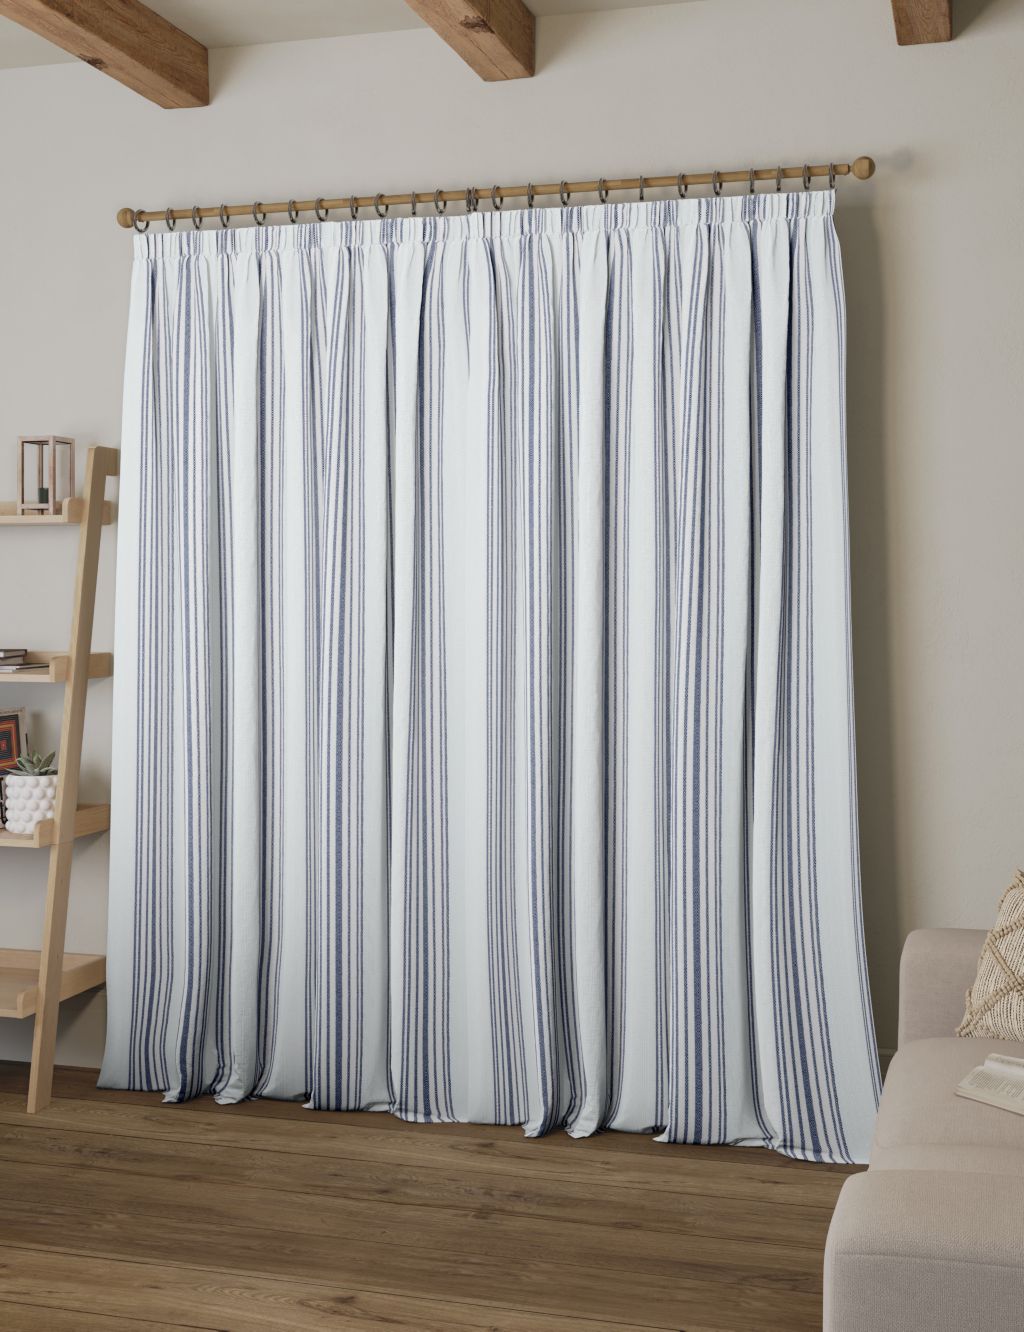 Woven Striped Pencil Pleat Curtains image 2